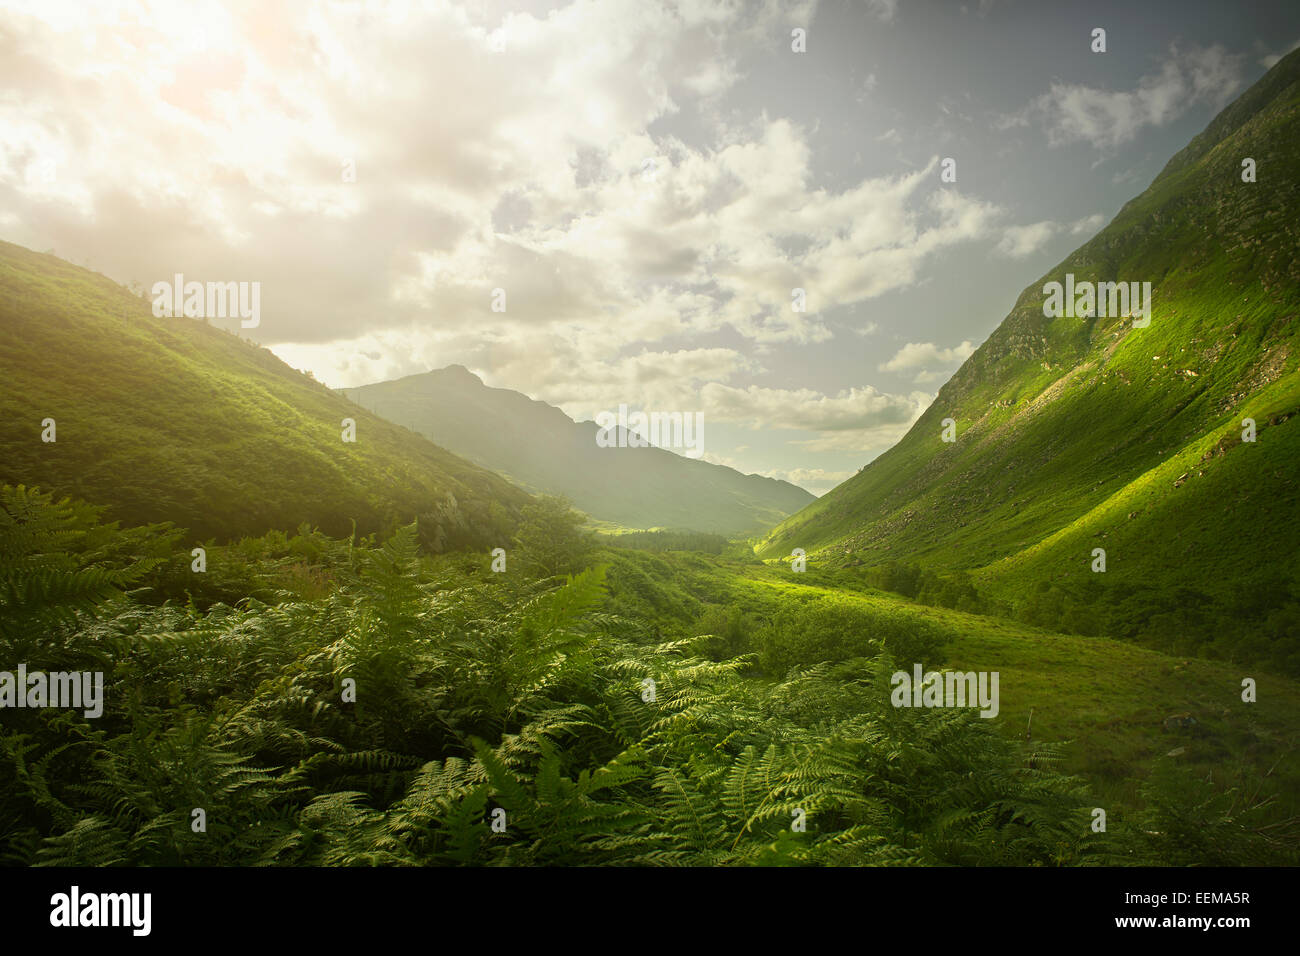 Rolling green hills in remote landscape Stock Photo